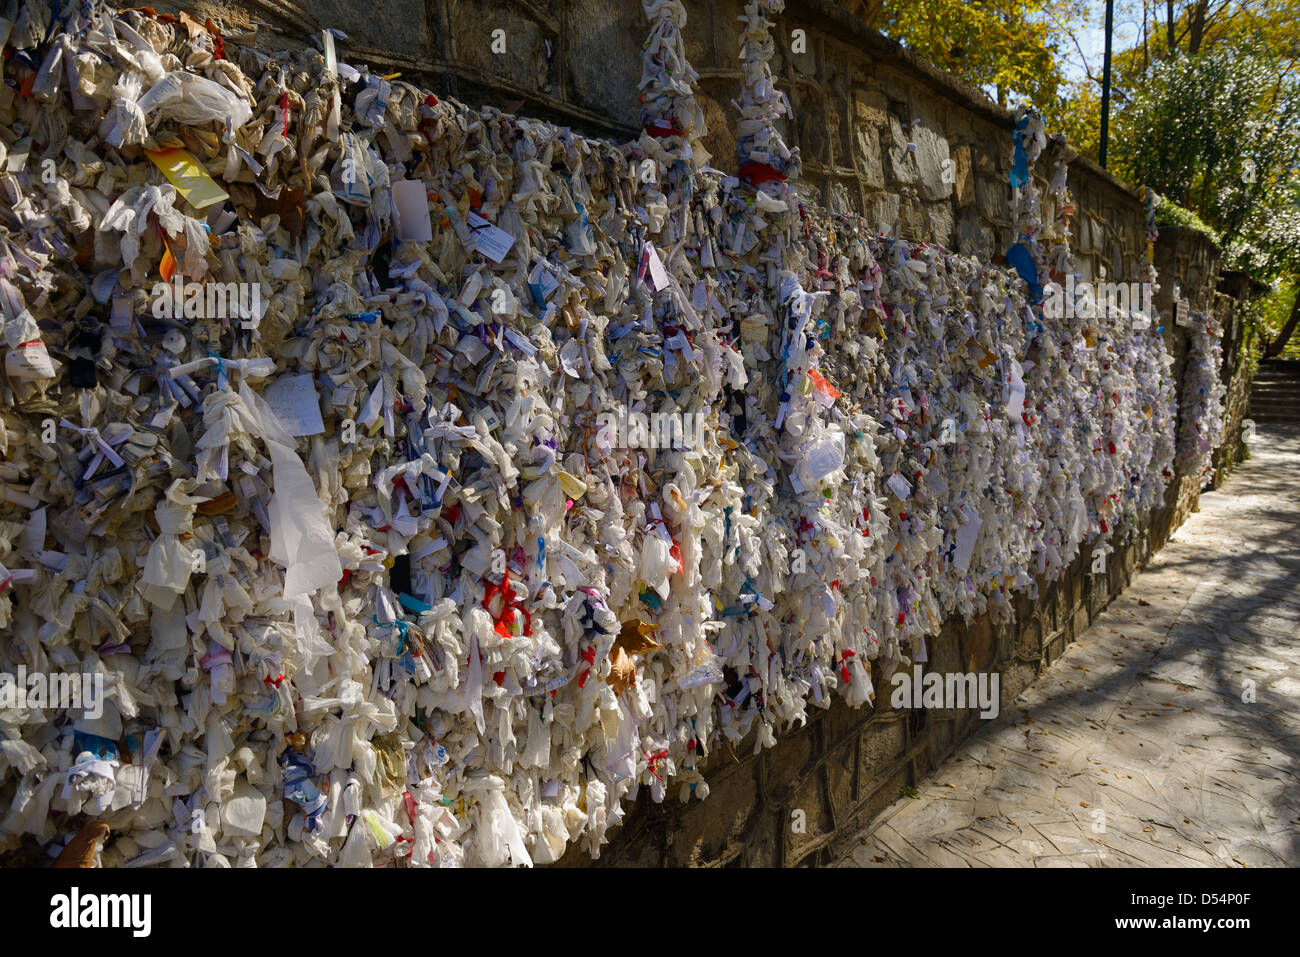 Wishing wall with tied note petitions to the Virgin Mary saint and Mother of God at her restored house near Ephesus Turkey Stock Photo